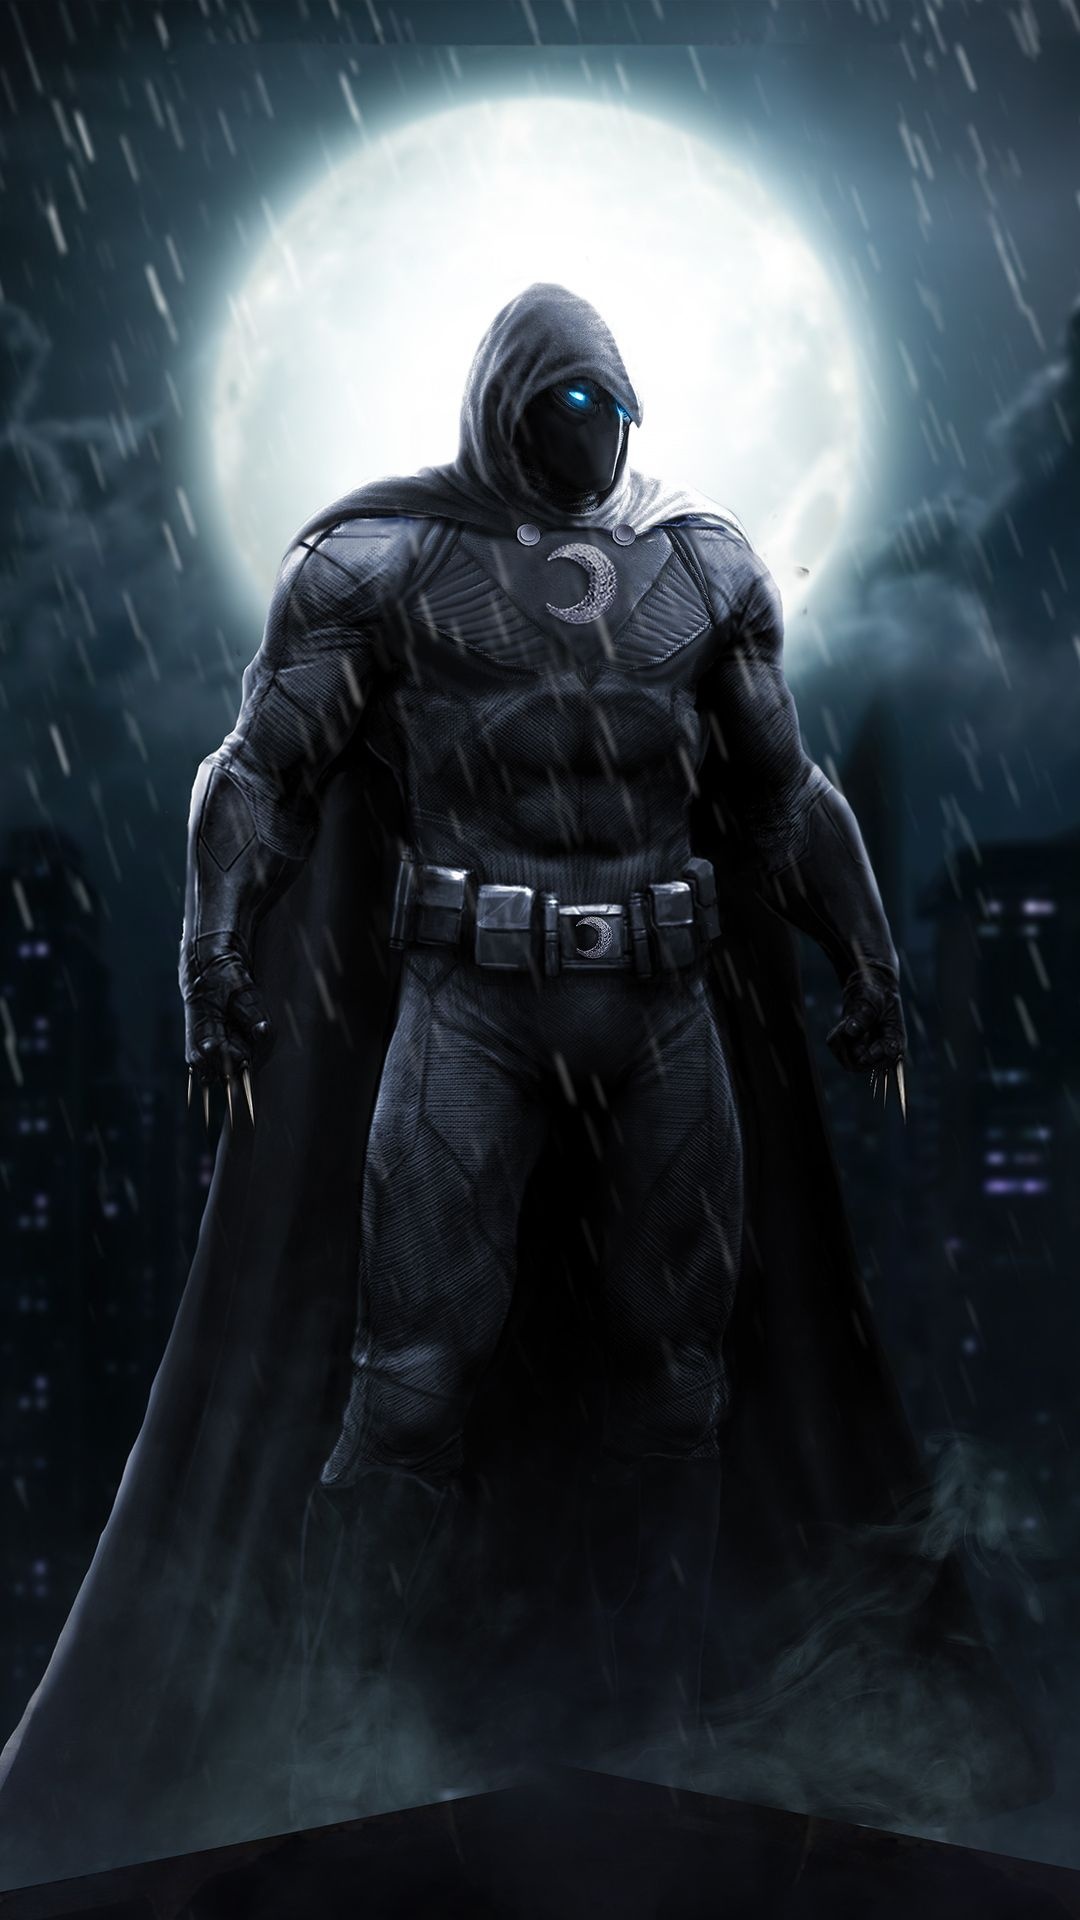 Moon Knight wallpapers, Moon Knight backgrounds, Moon Knight top images, Moon Knight download, 1080x1920 Full HD Phone